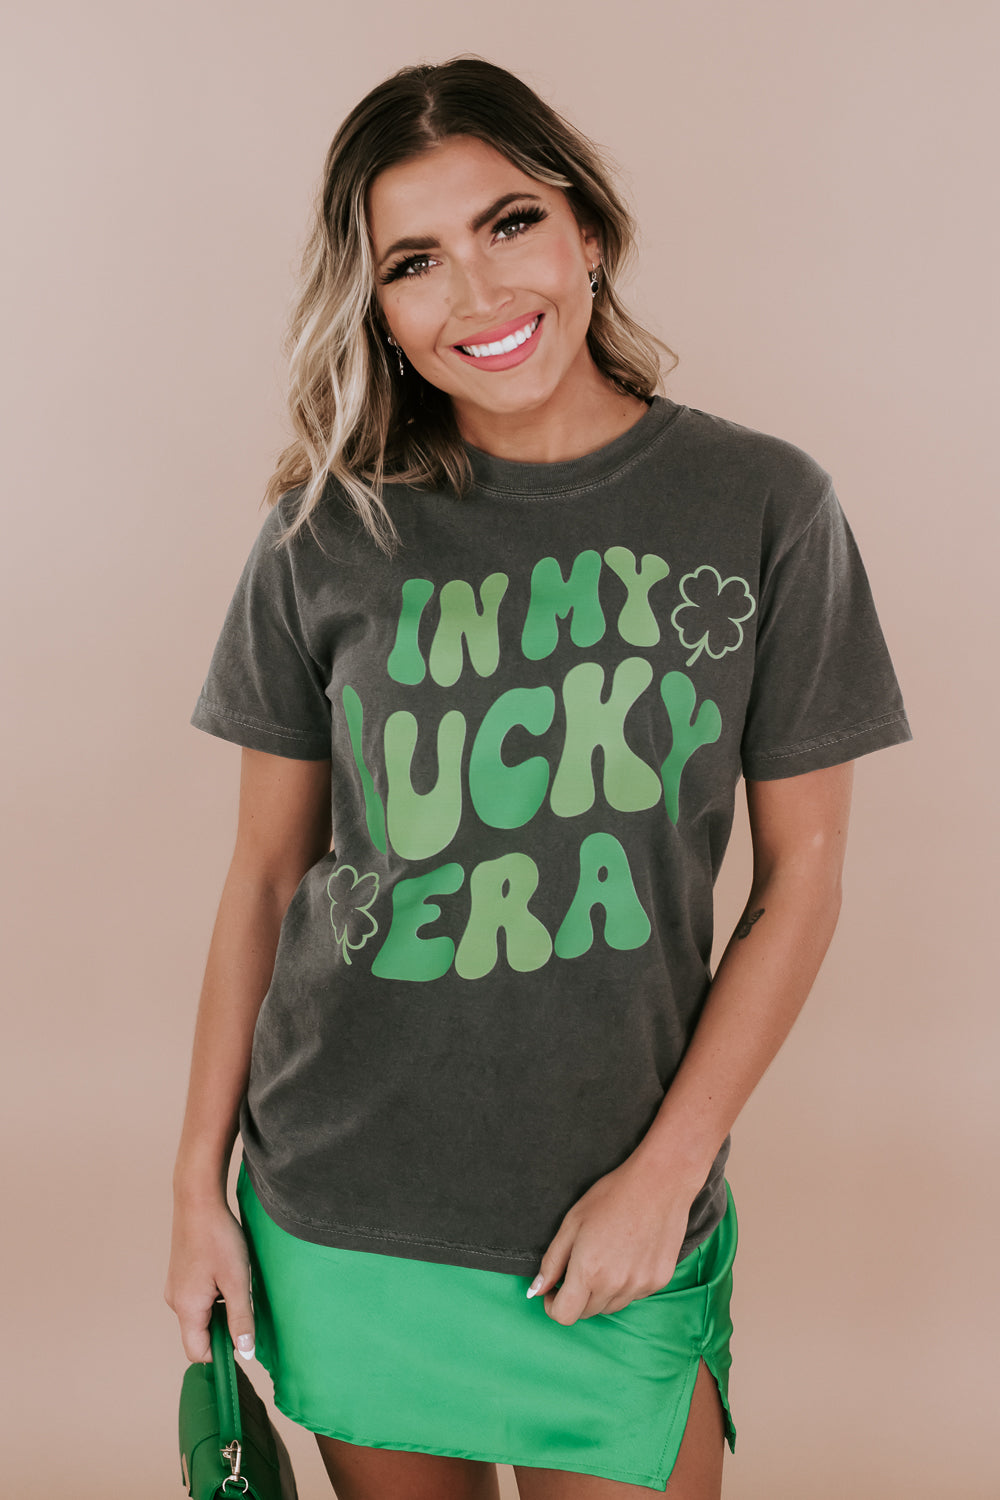 Lucky Era Graphic tee, St. pattys graphic tee, "In my lucky Era" Graphic tee, Green outfit inspo, St. Patrick's day outfit